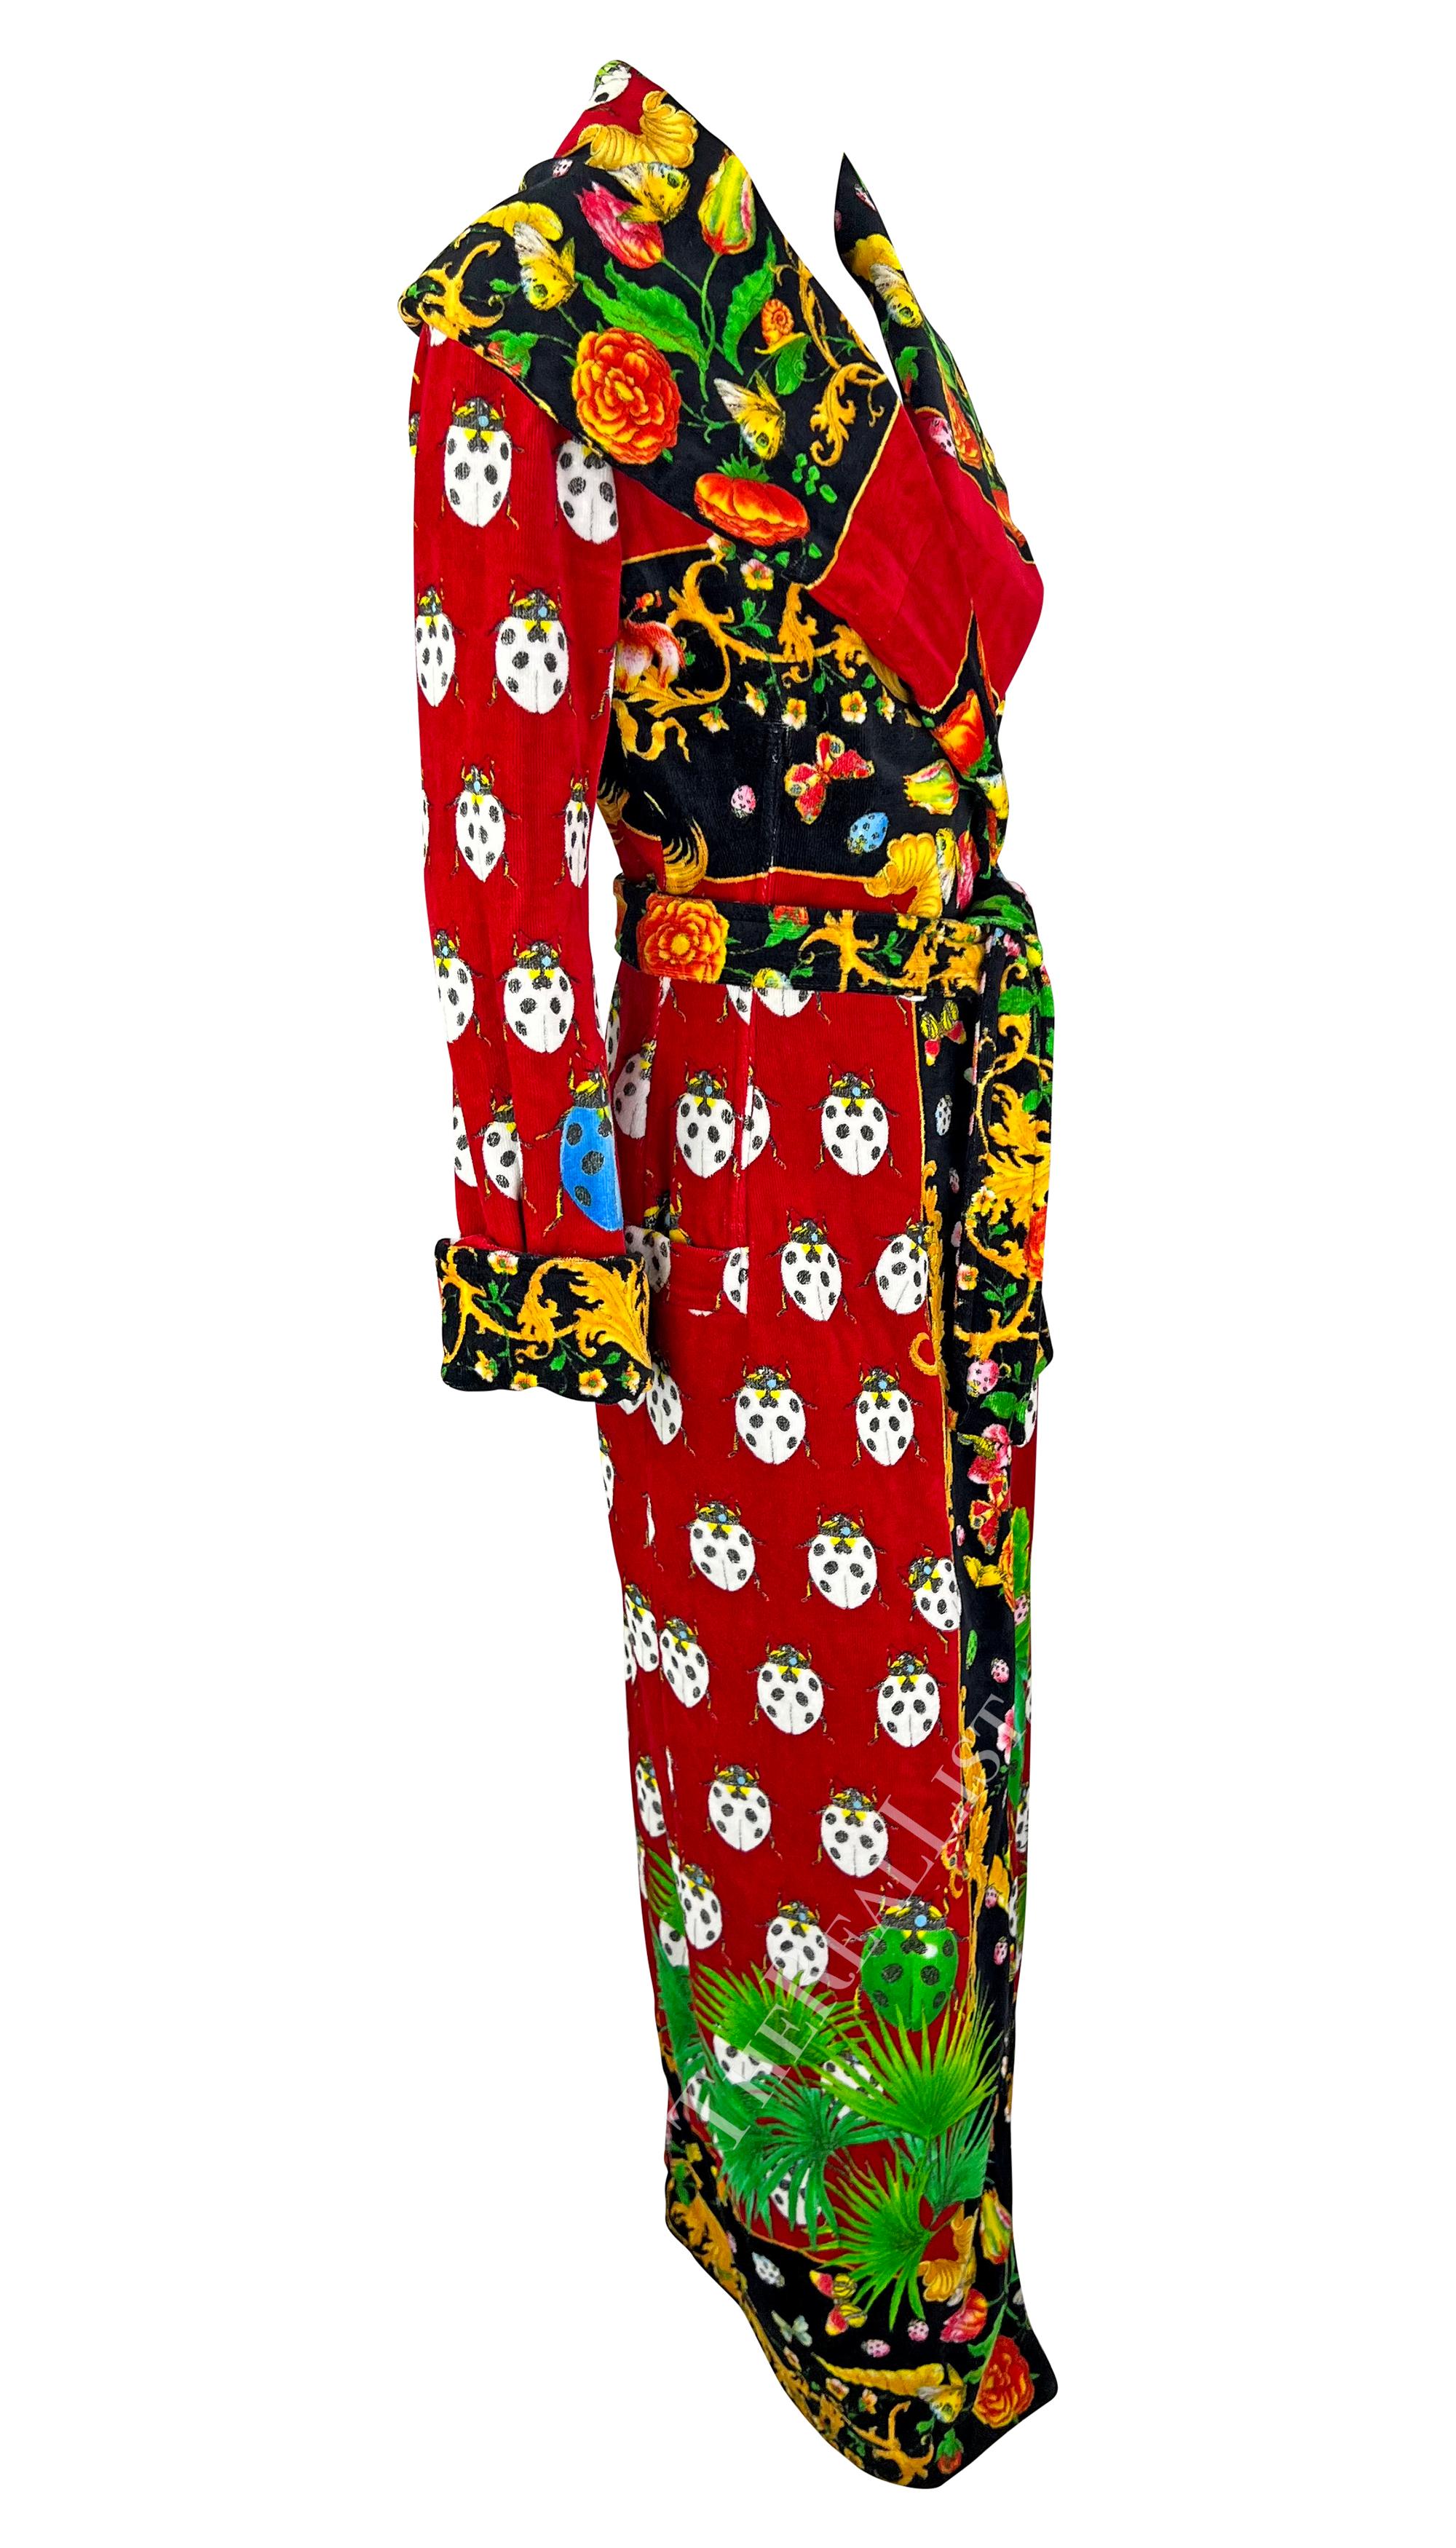 S/S 1995 Gianni Versace Red Lady Bug Print Corset Boned Terrycloth Robe For Sale 7